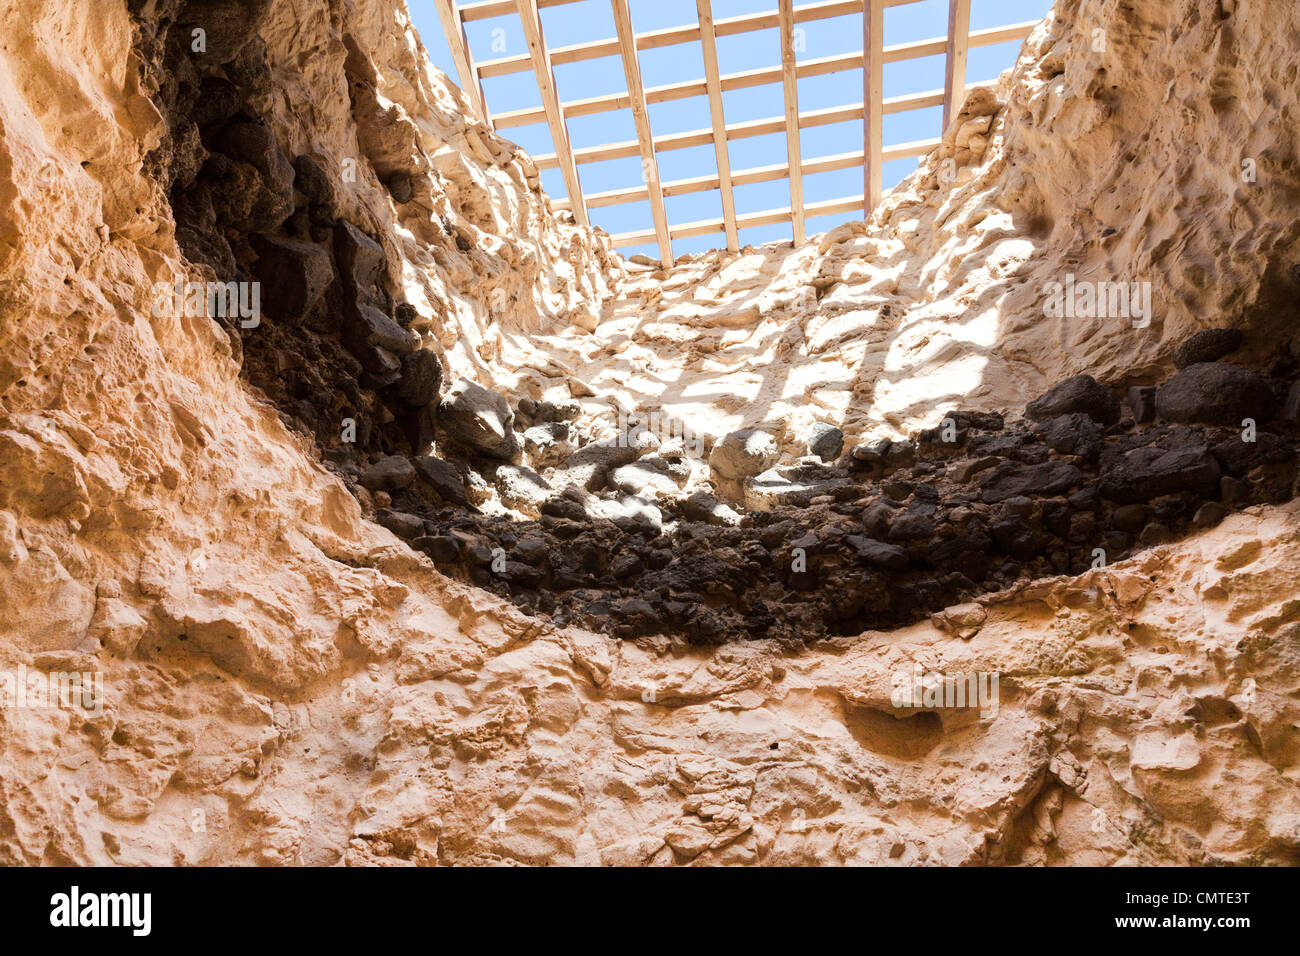 Looking upwards inside an old lime kiln at the seaside village of Ajuy, Fuerteventura, Canary Islands Stock Photo